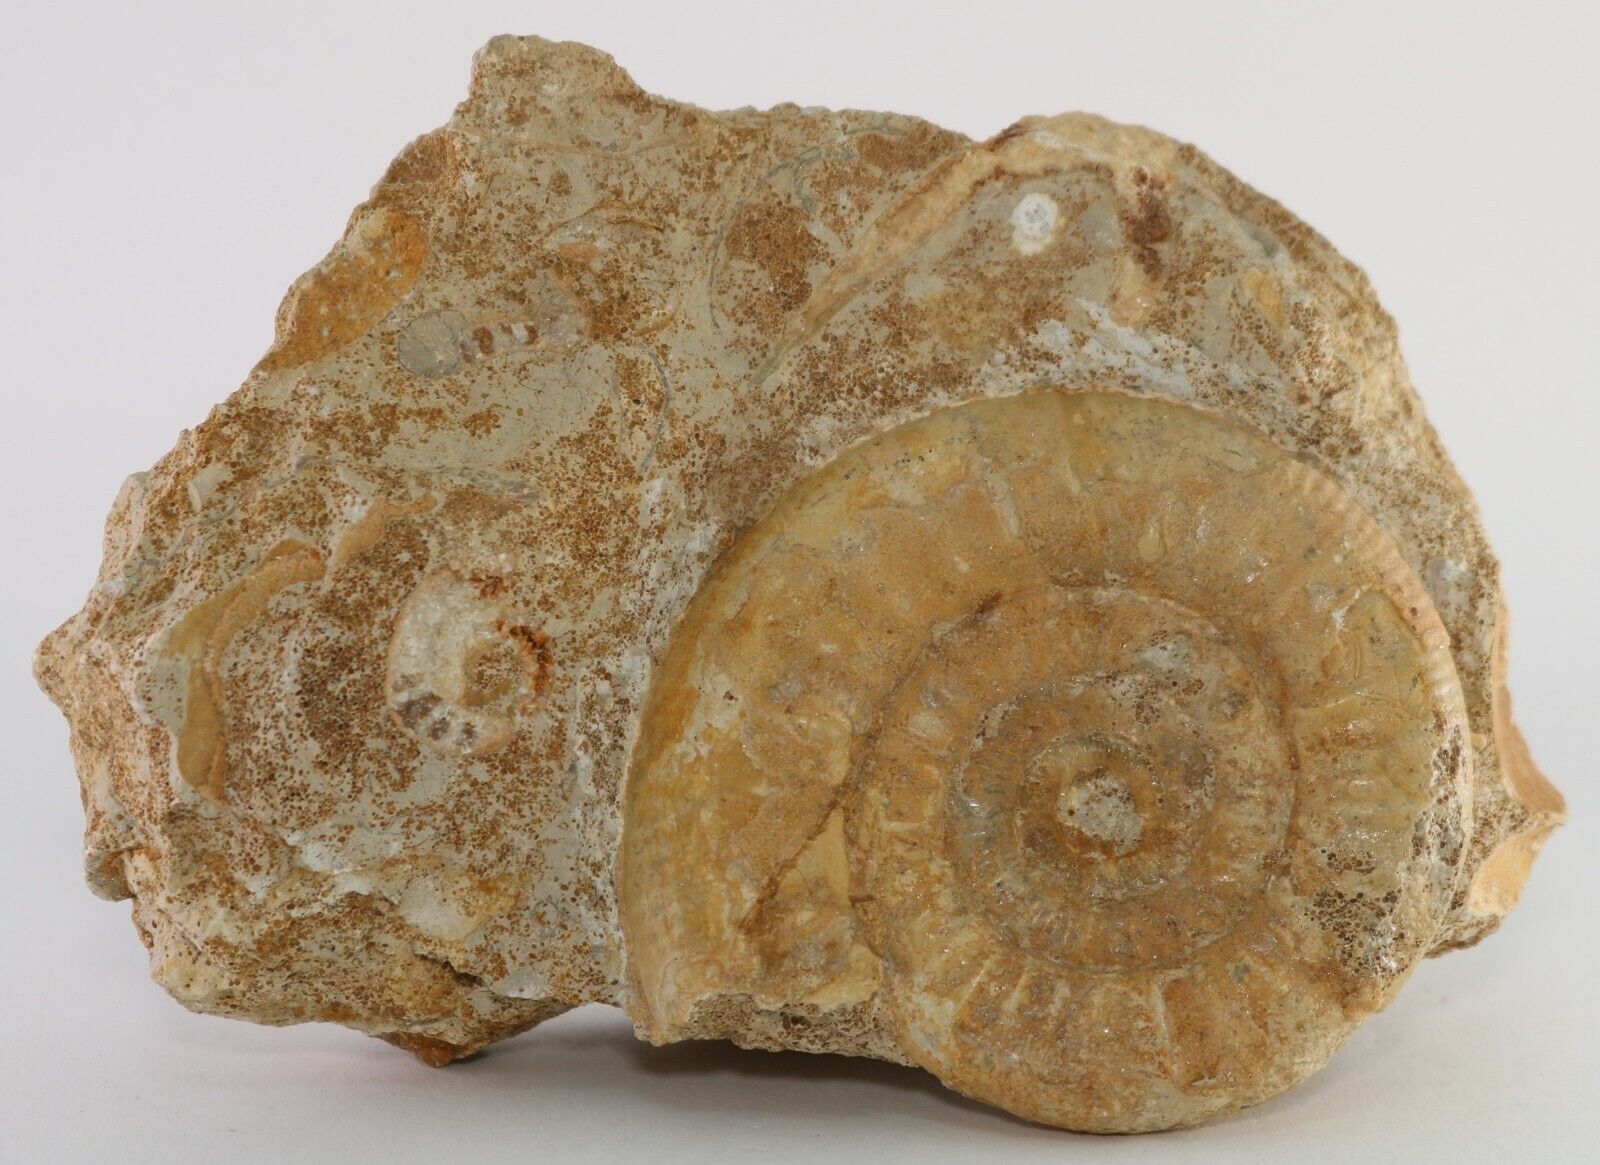 Fossil Awesome Ammonite &Shells Old Find Belmont Alsace Region France COA 2883